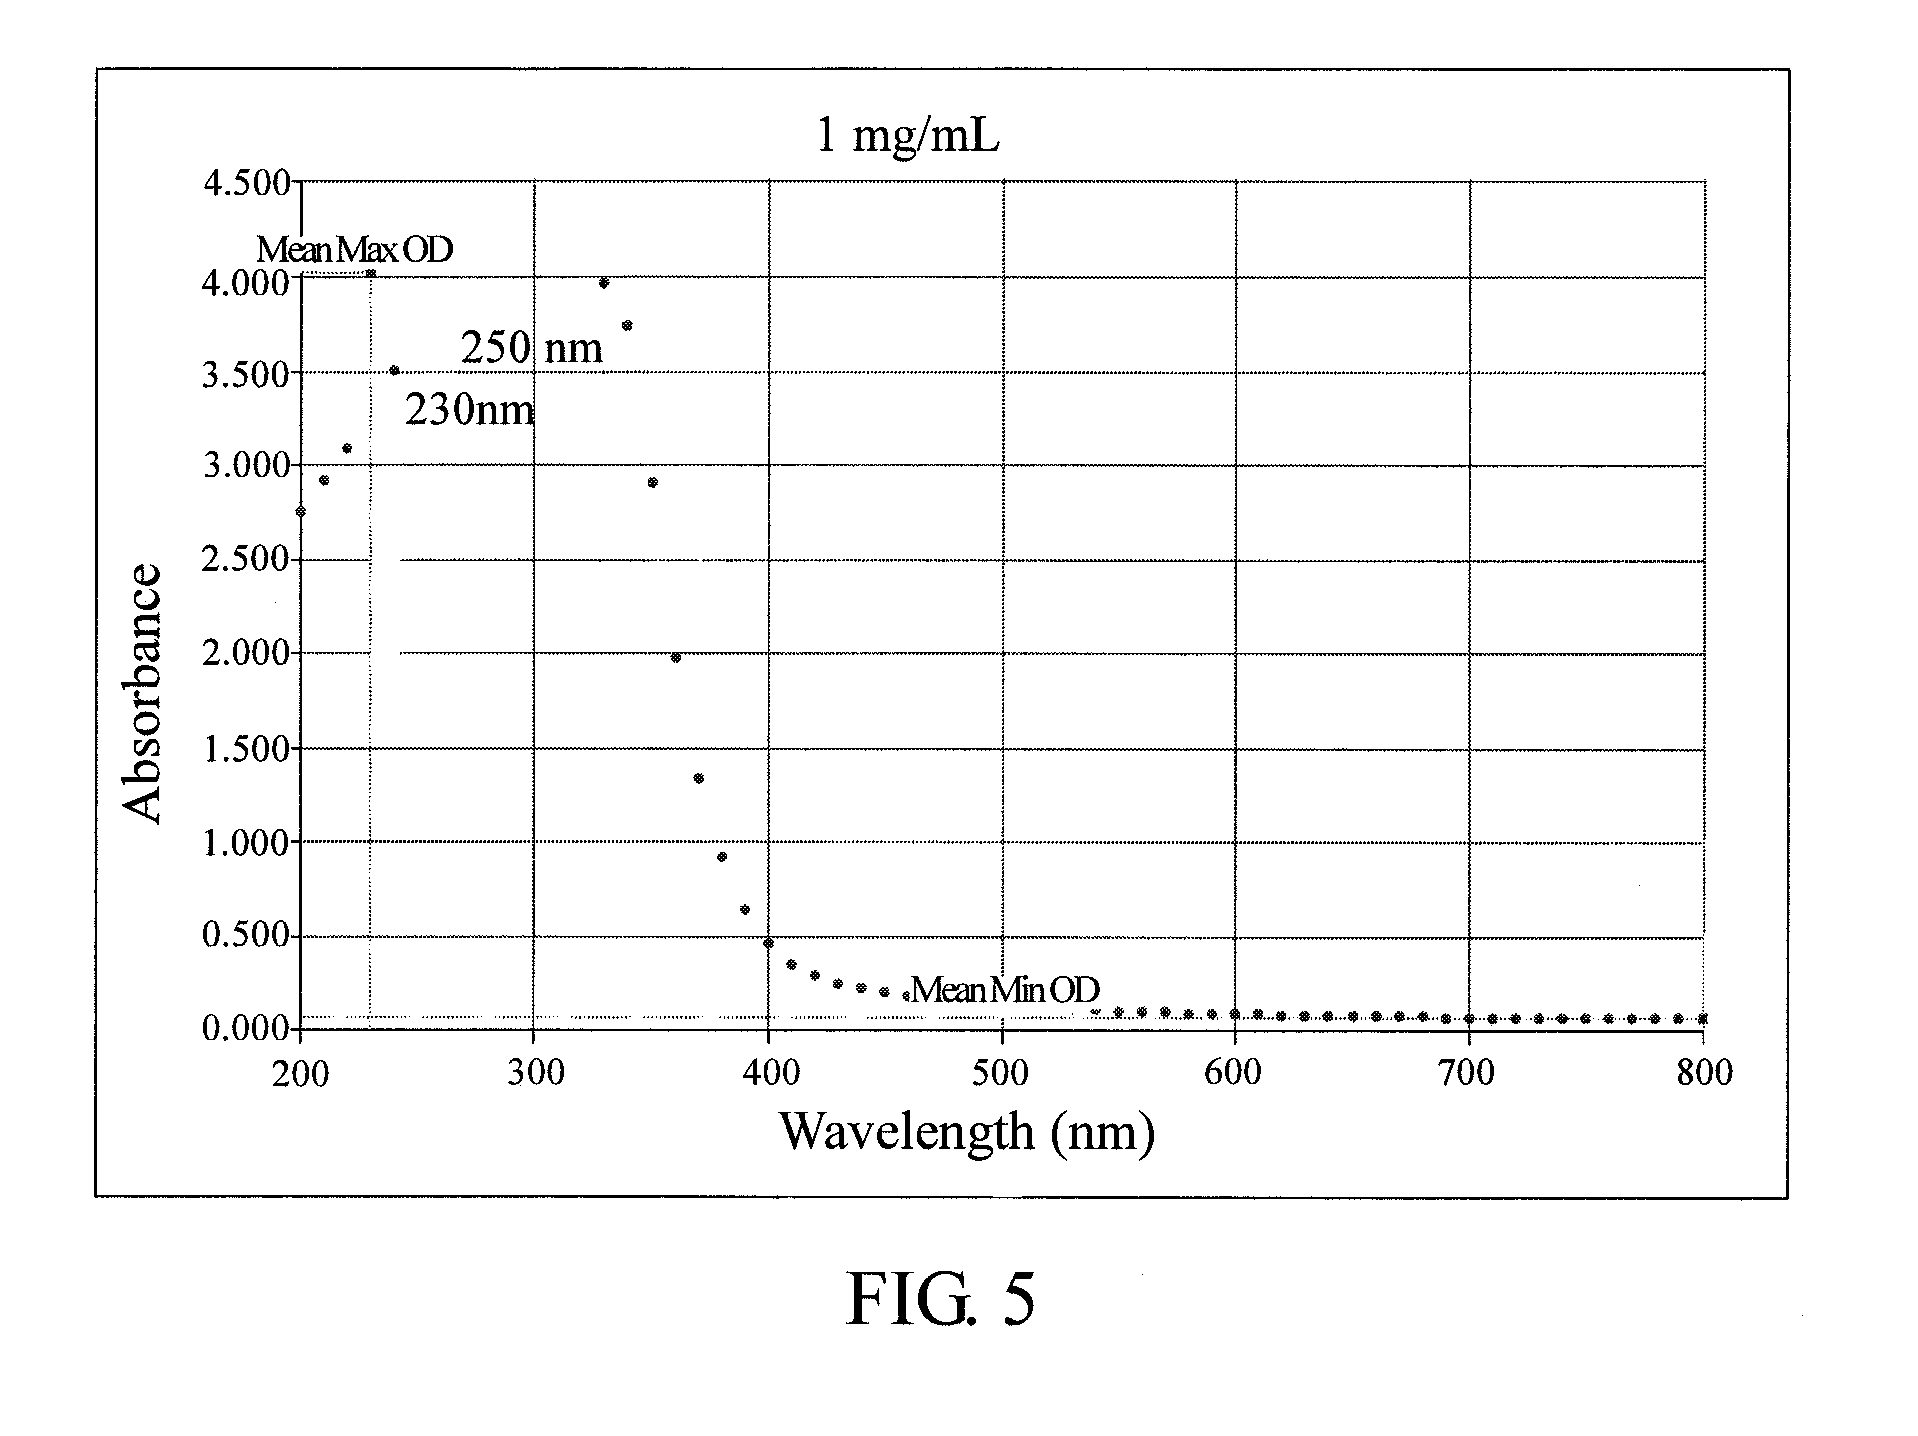 Method for anti-oxidation, inhibiting activity and/or expression of matrix metalloproteinase, and/or inhibiting phosphorylation of mitogen-activated protein kinase using neonauclea reticulata leaf extracts